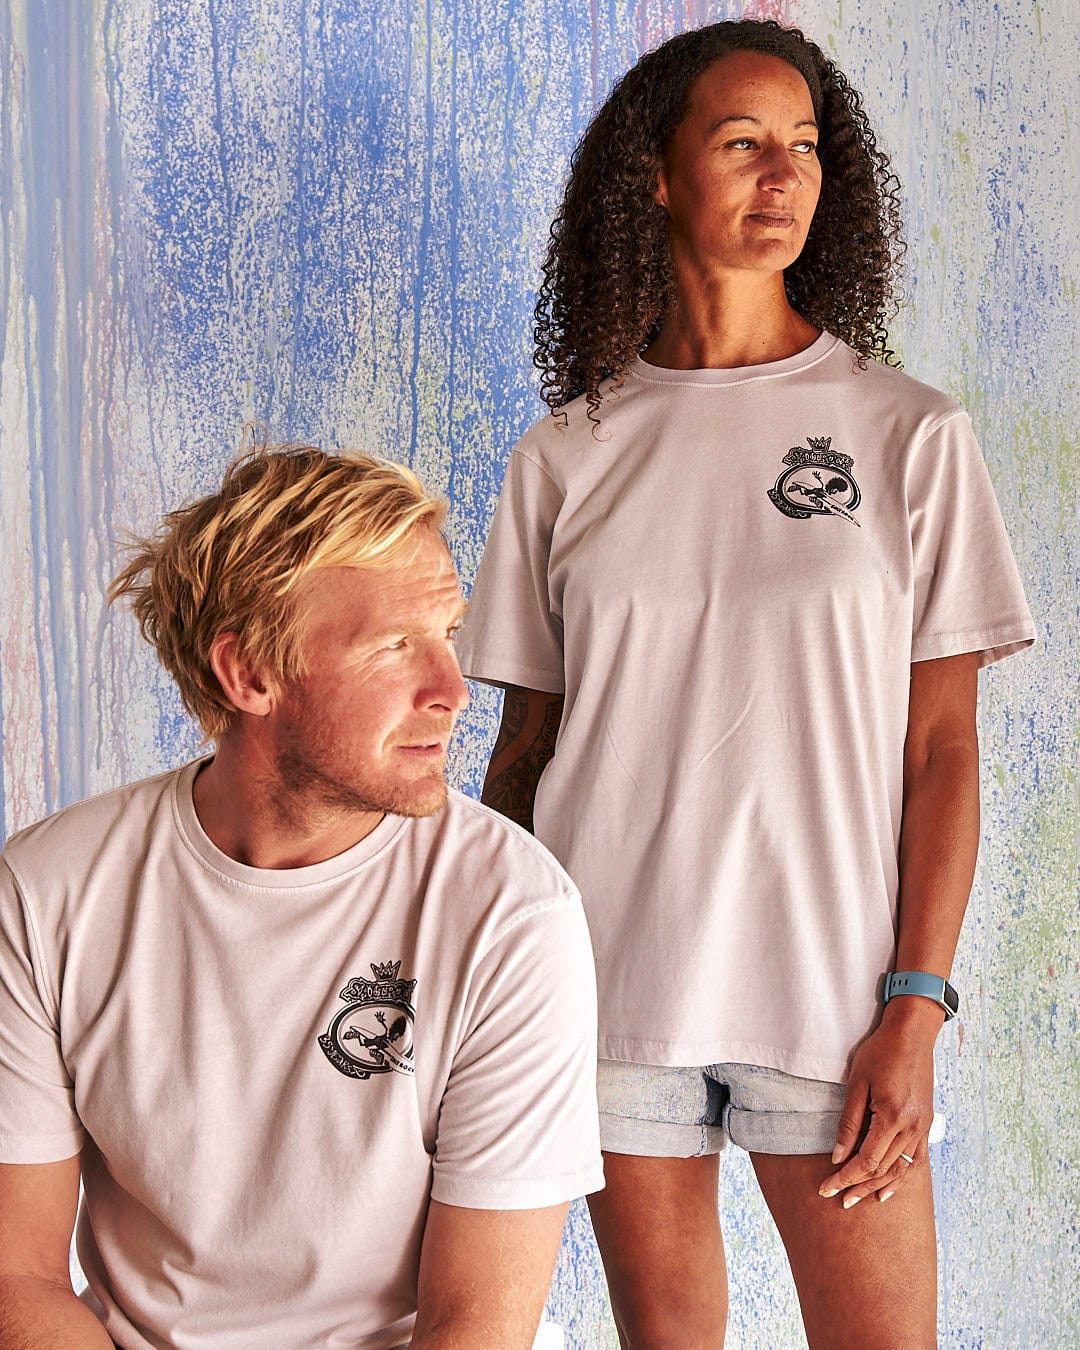 A man and a woman wearing Saltrock's Balls To The Wall - Limited Edition 35 Years T-Shirt.